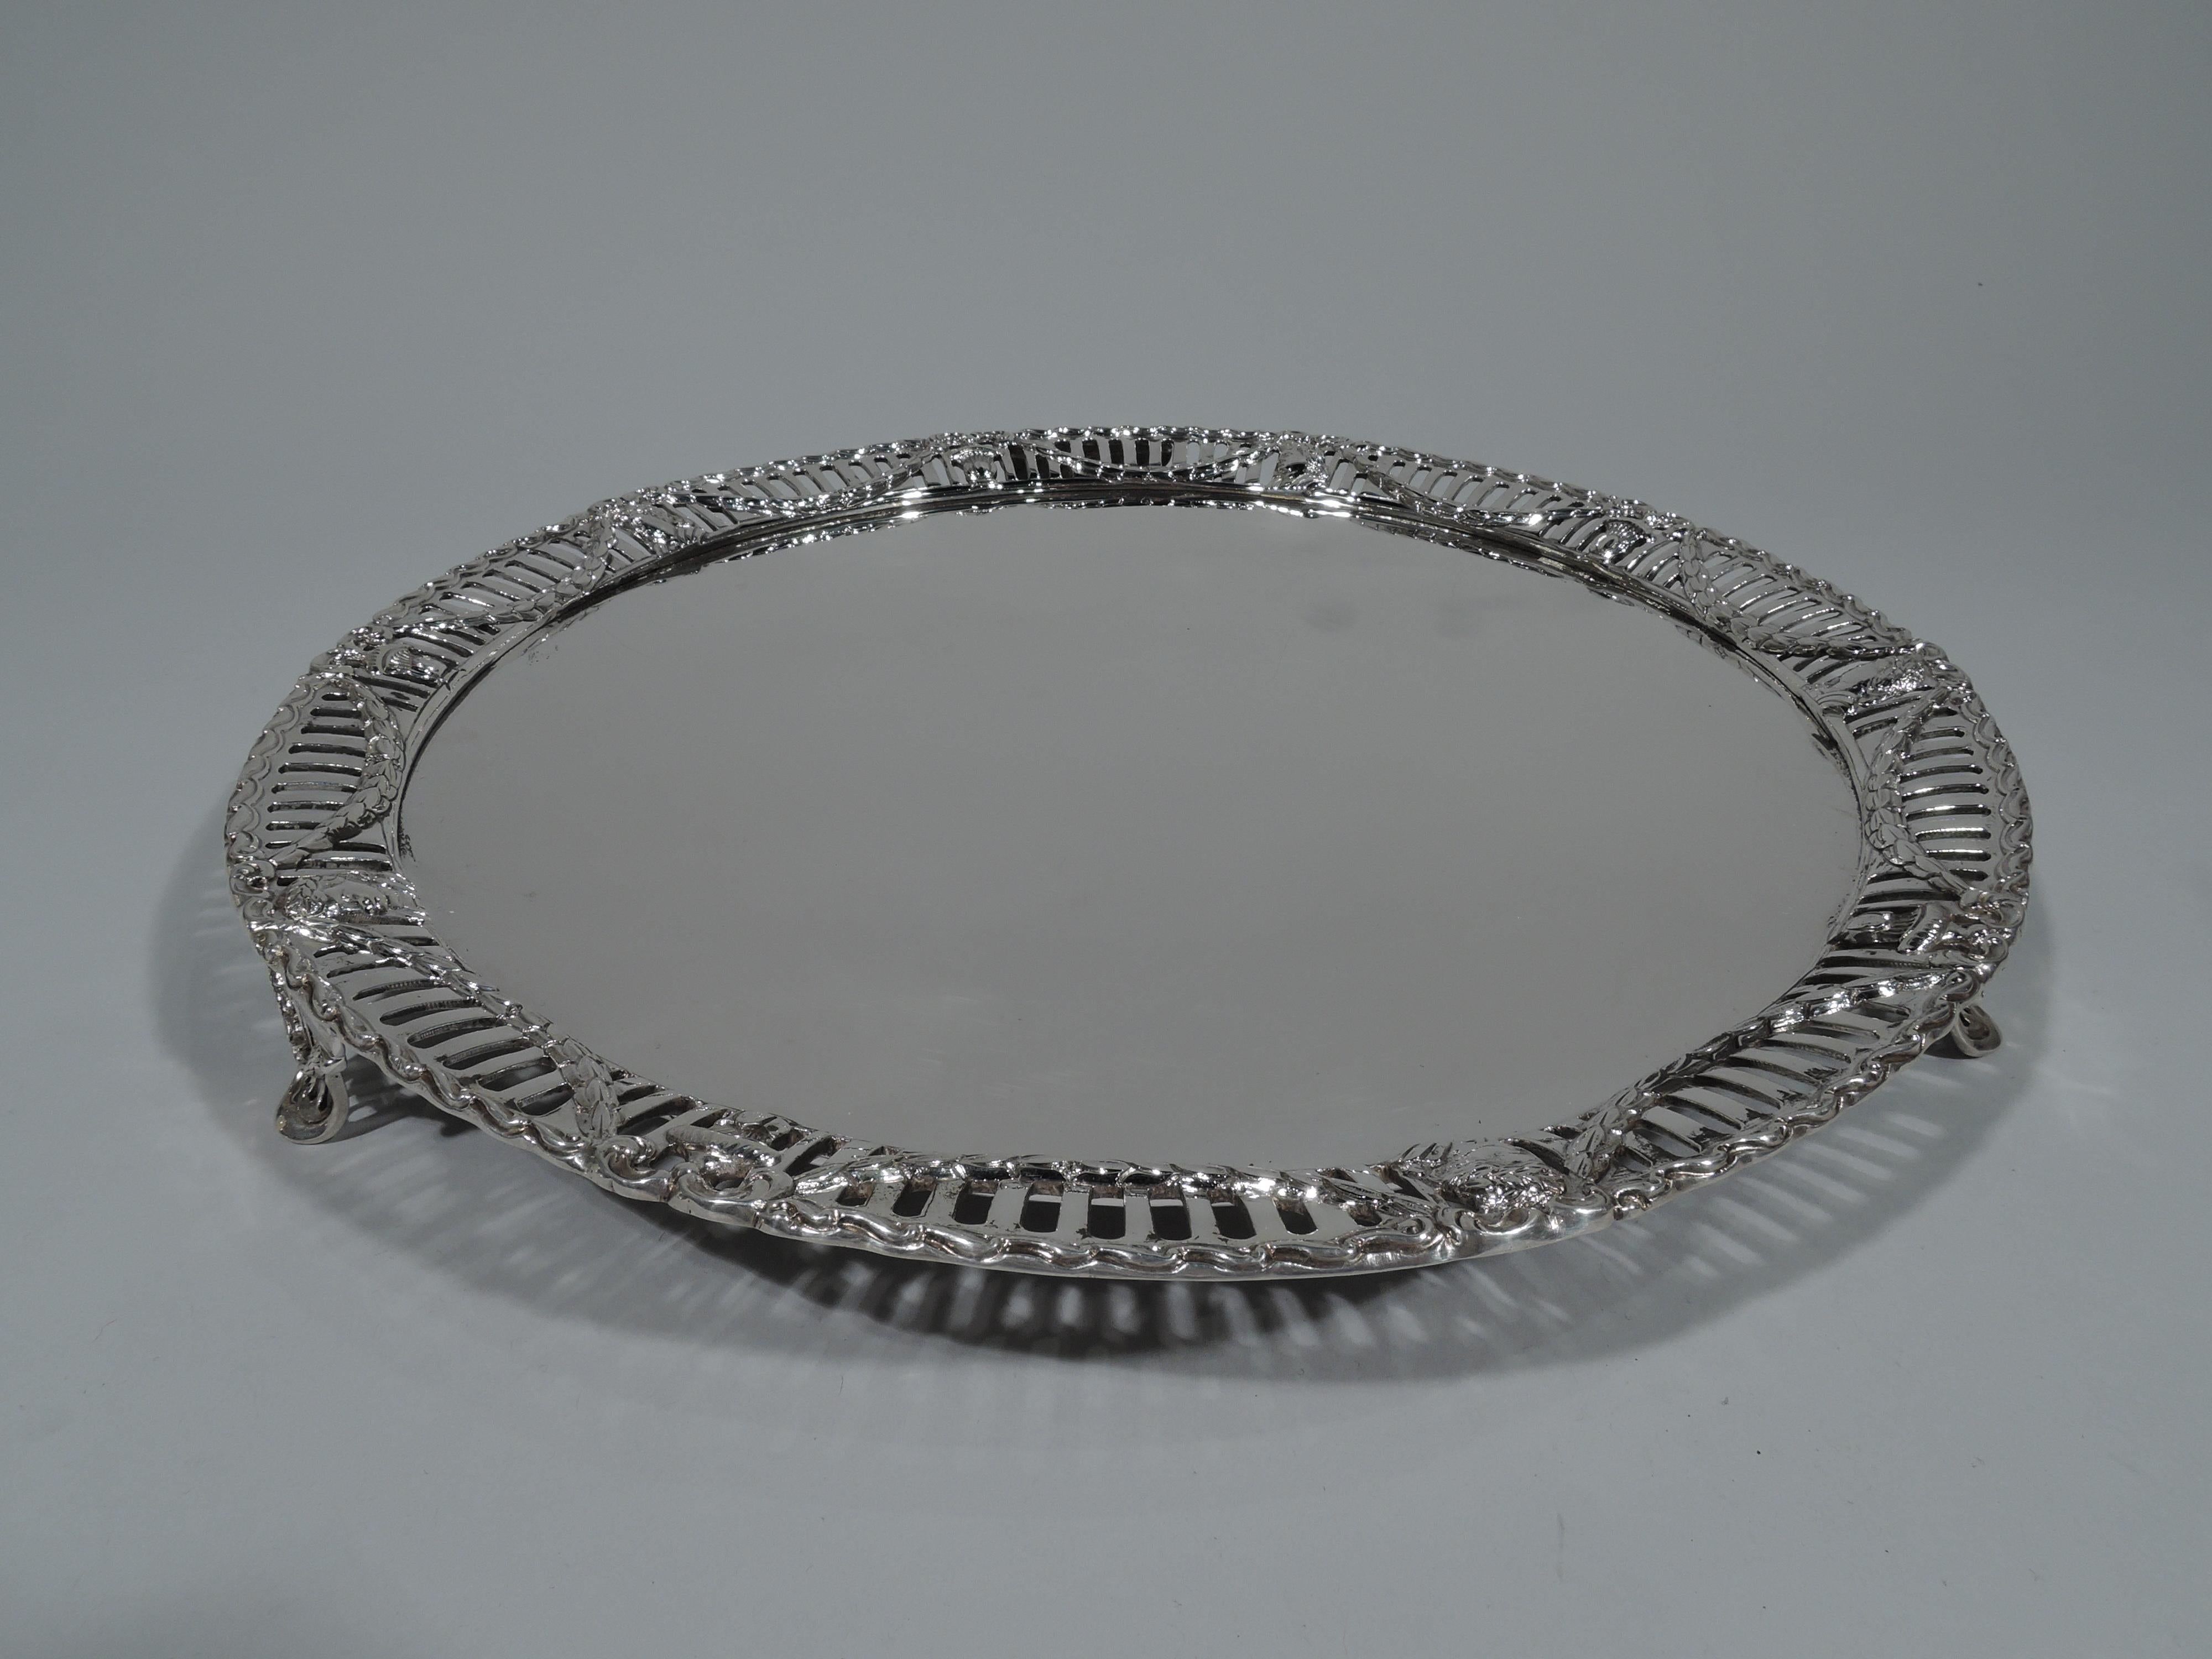 Edwardian sterling silver salver. Made by Charles Stuart Harris & Sons in London in 1908. Round with solid well. Tapering and pierced shoulder with applied swags, vases, and laurel-wreathed heads. Rim has applied Vitruvian scrollwork. Four supports